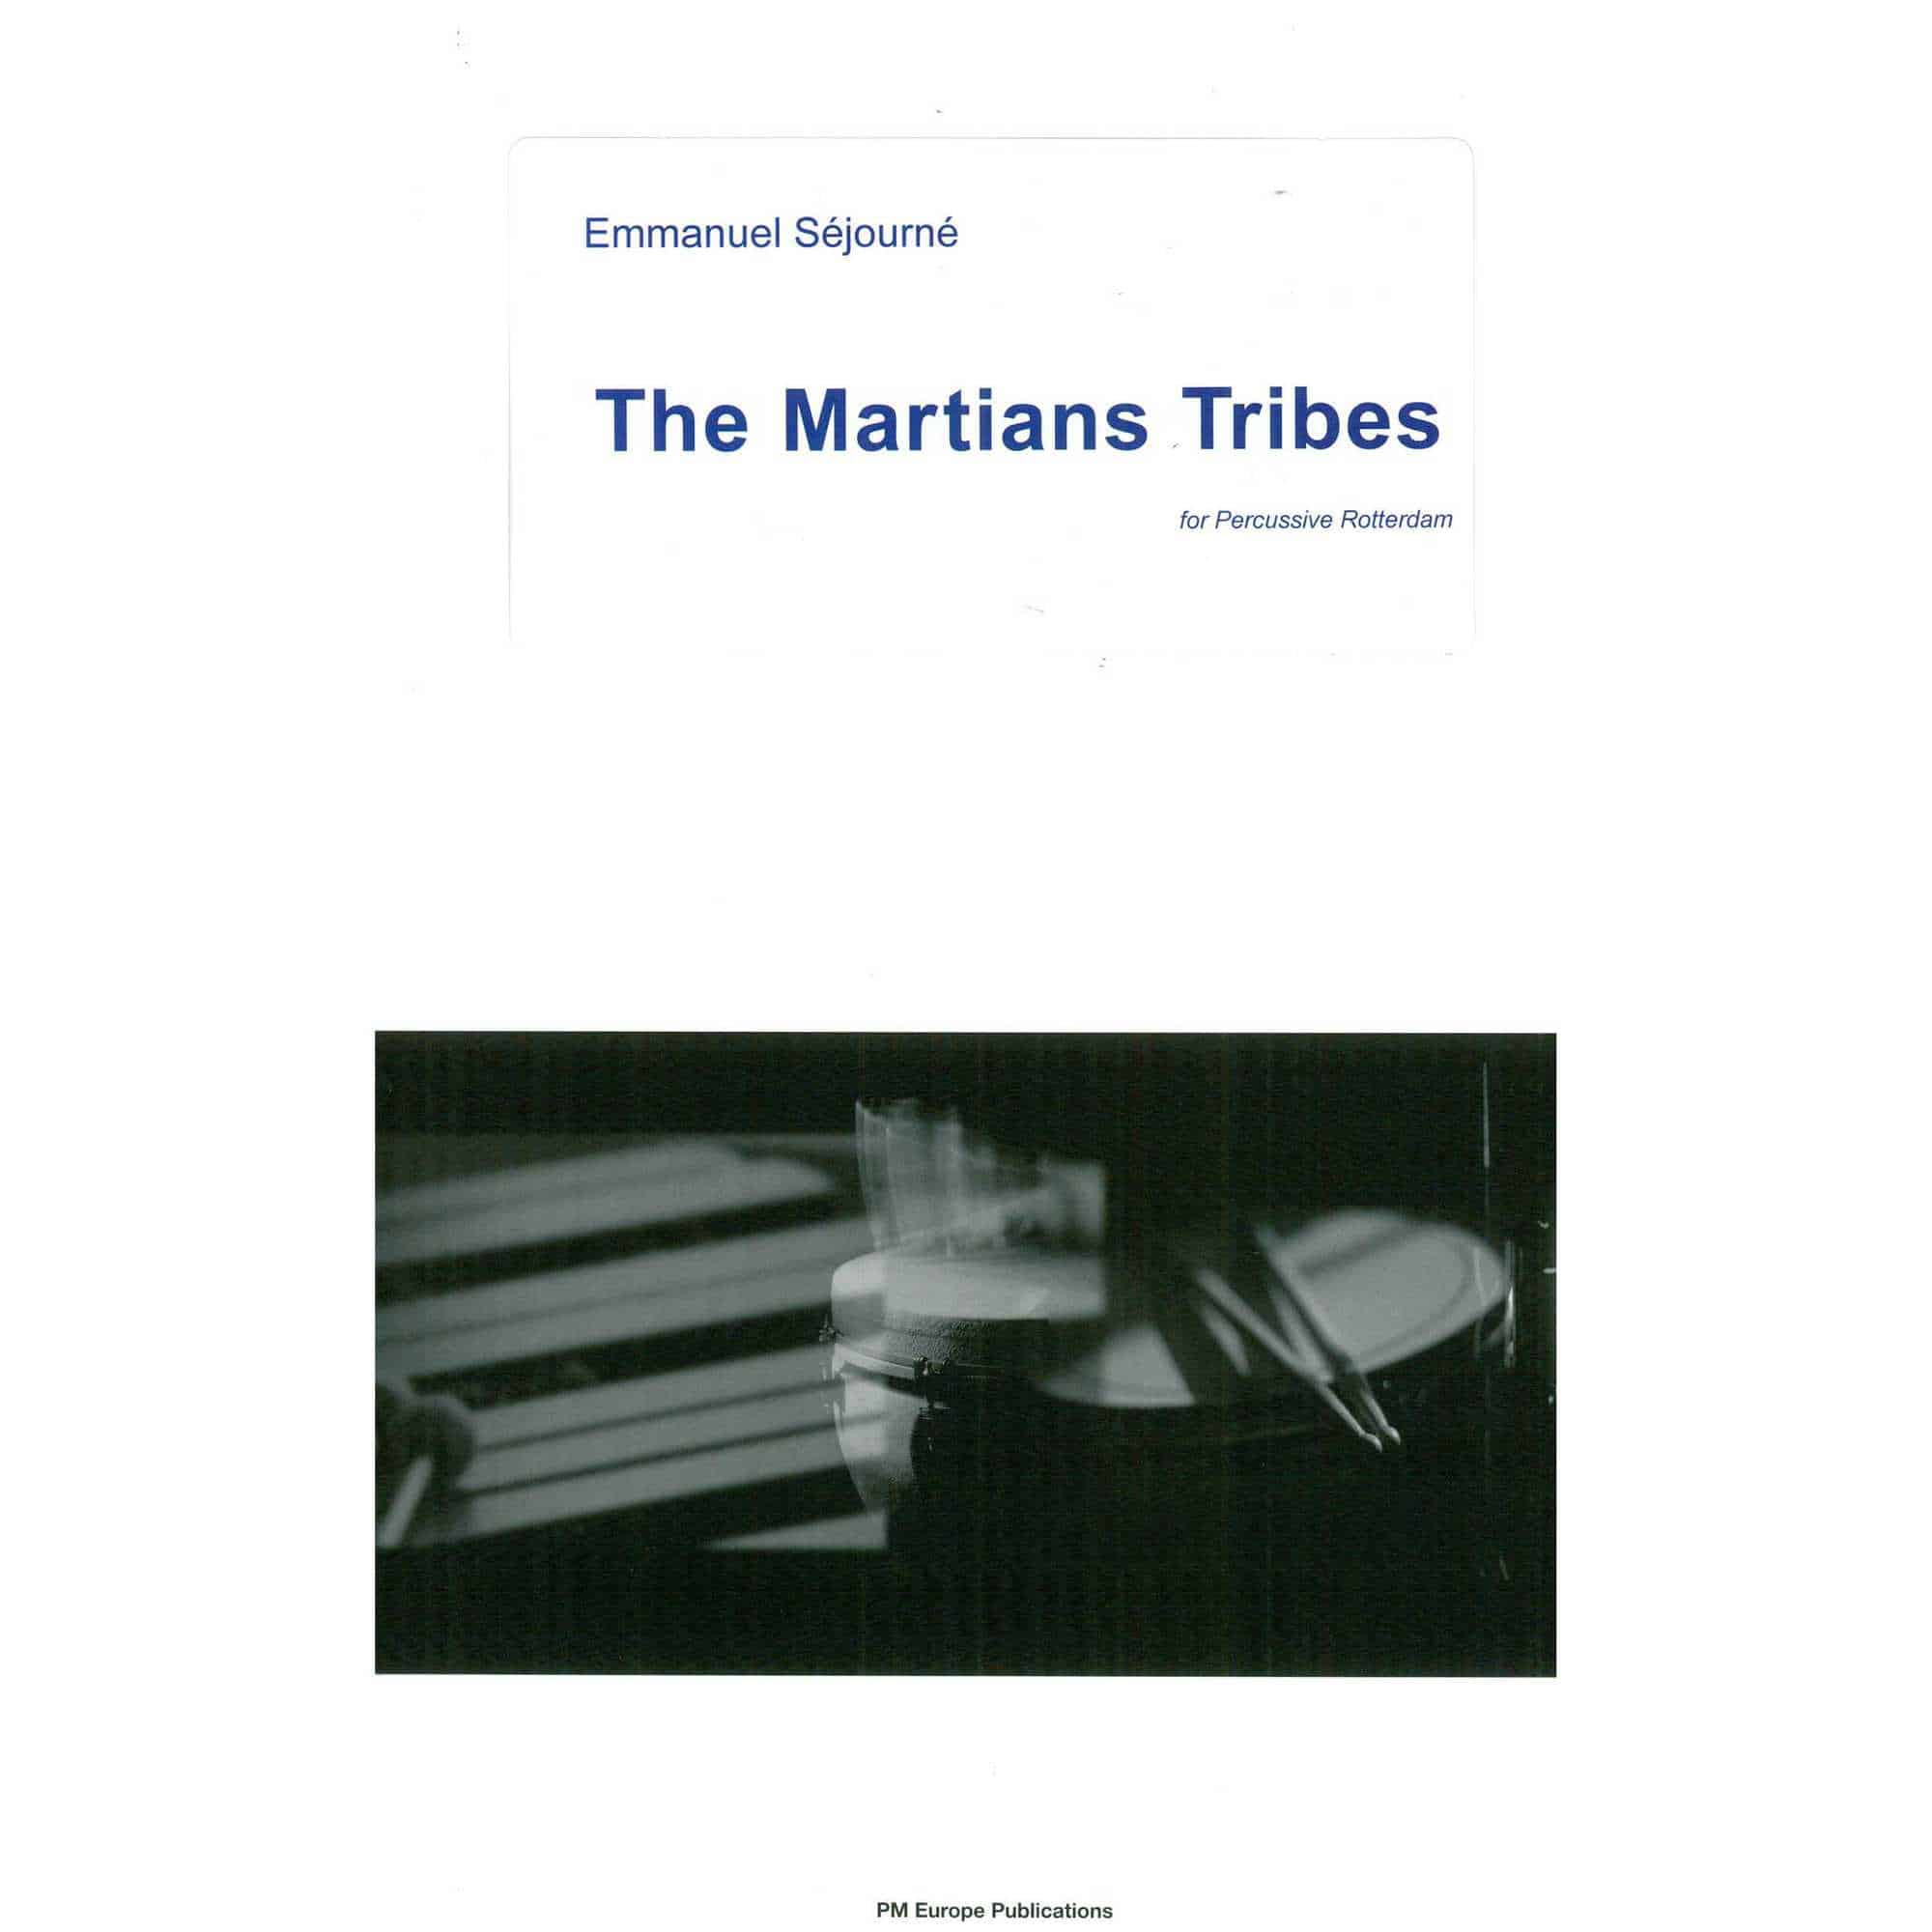 The Martians Tribes